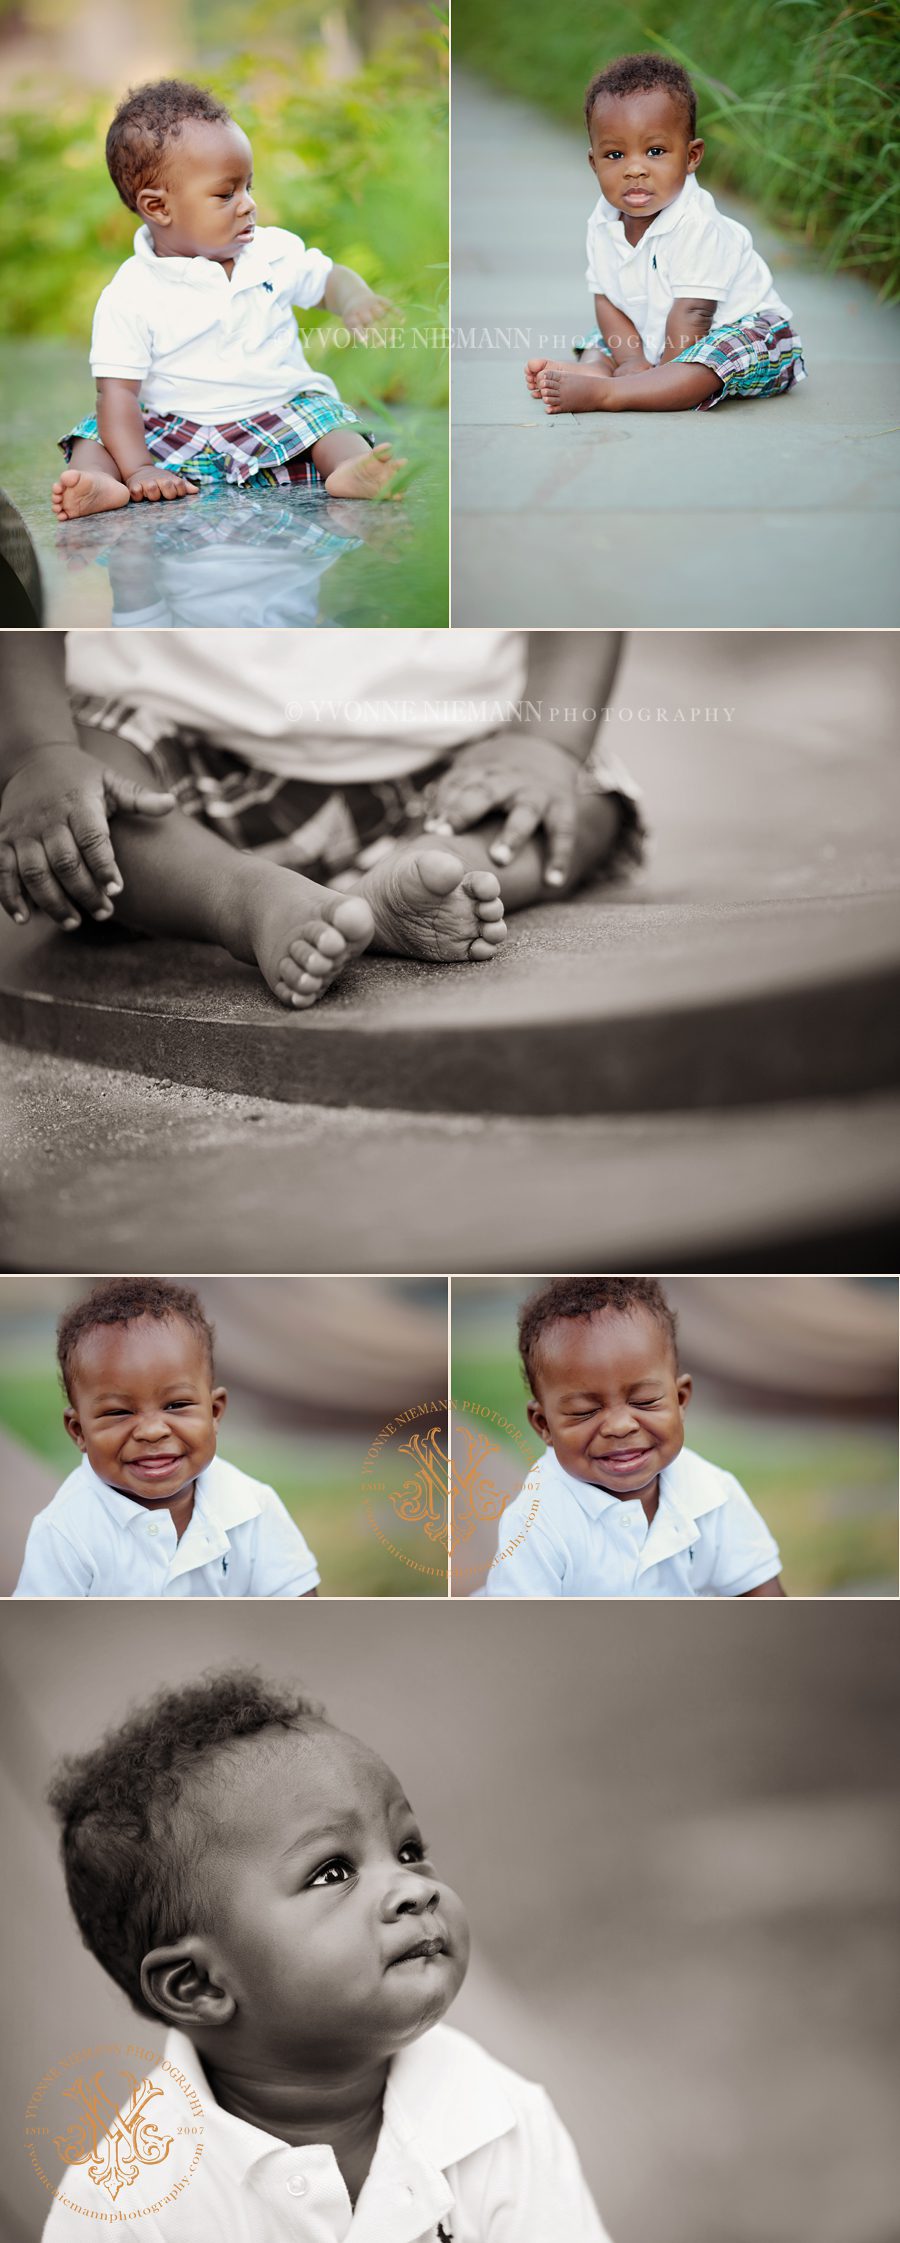 Photography of a baby boy at the St. Louis City Garden taken by Yvonne Niemann